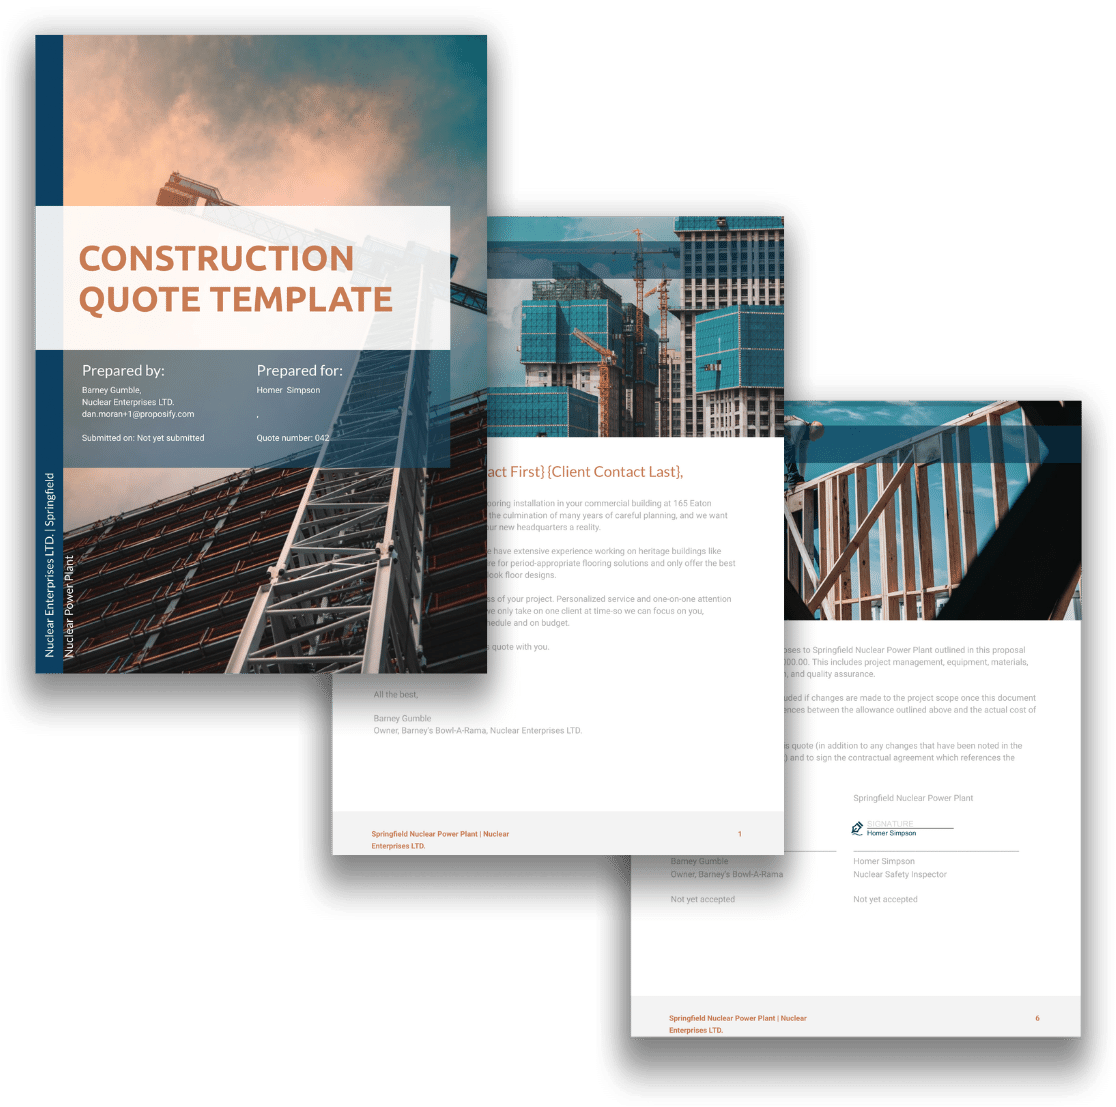 Construction quote template